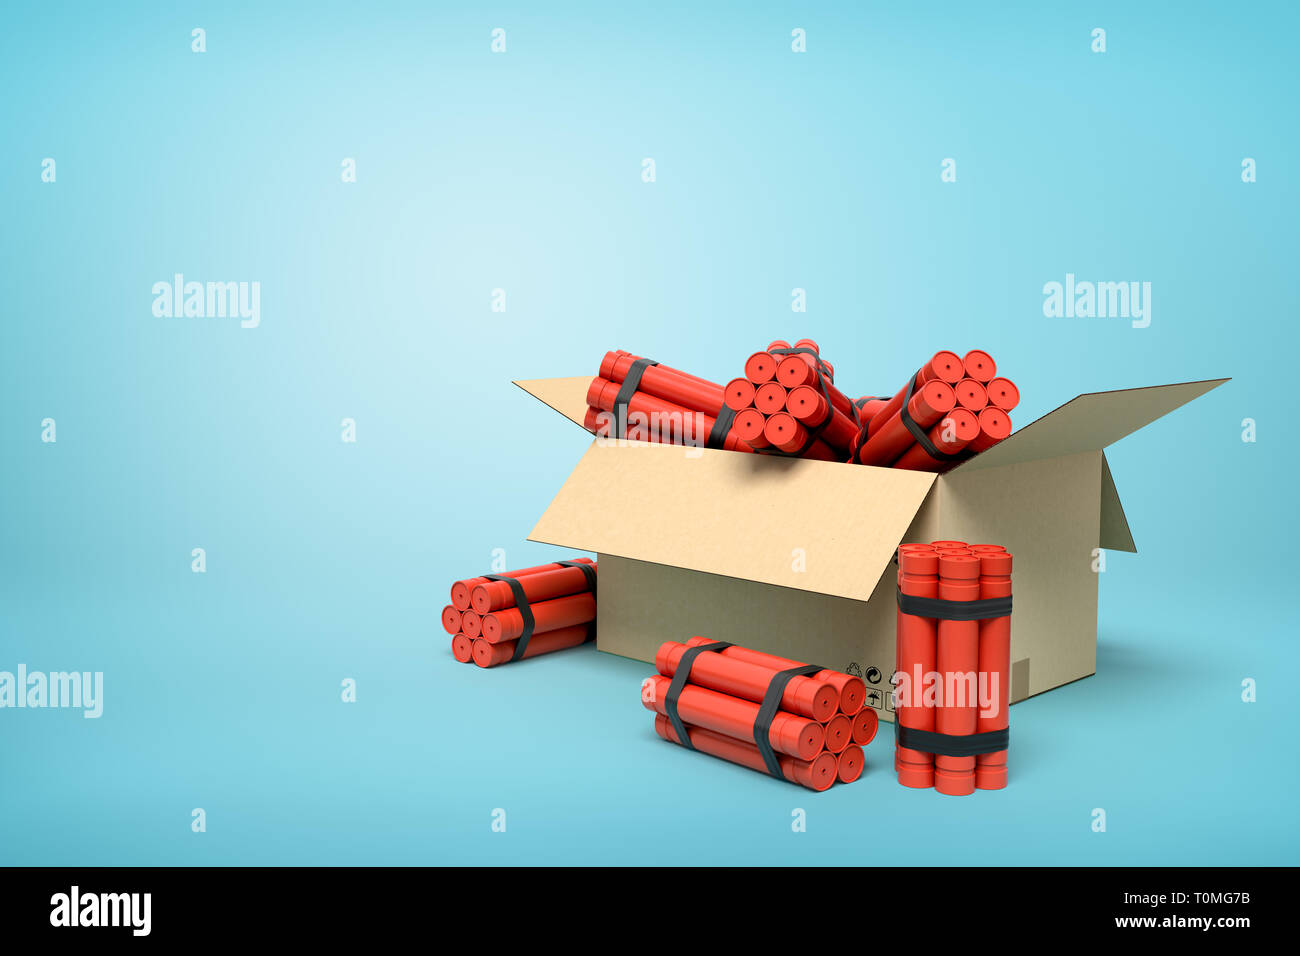 3d rendering of tnt dynamite sticks in carton box on blue background Stock Photo